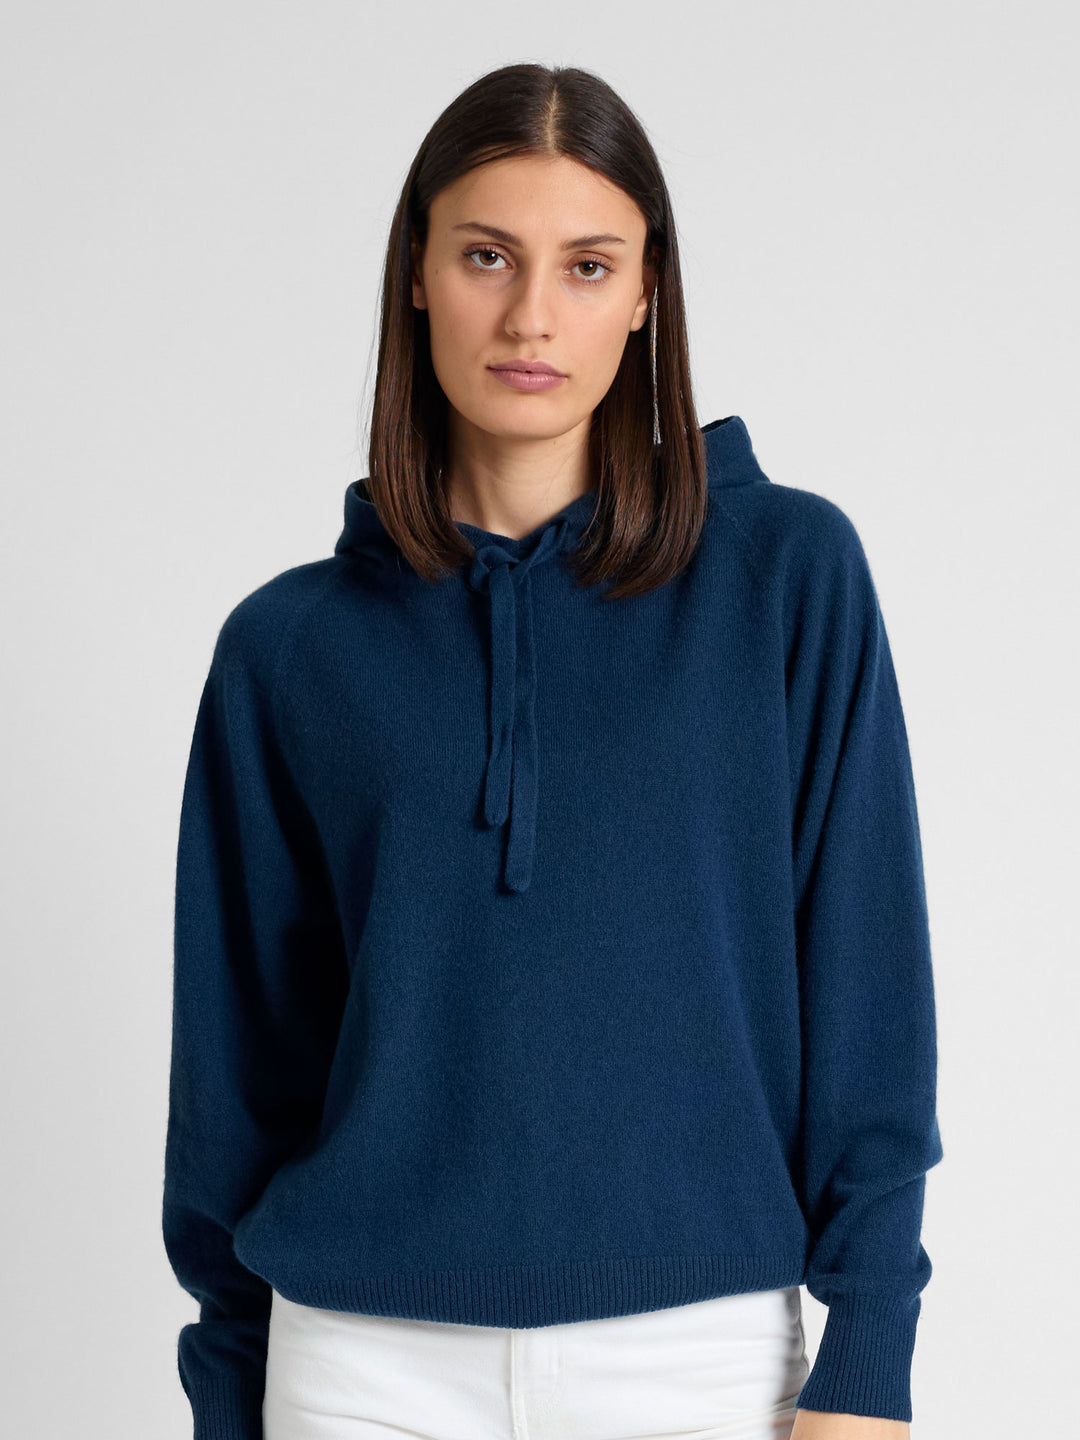 Cashmere hoodie "Lux Hoodie" in 100% pure cashmere. Scandinavian design by Kashmina. Color: Mountain Blue.